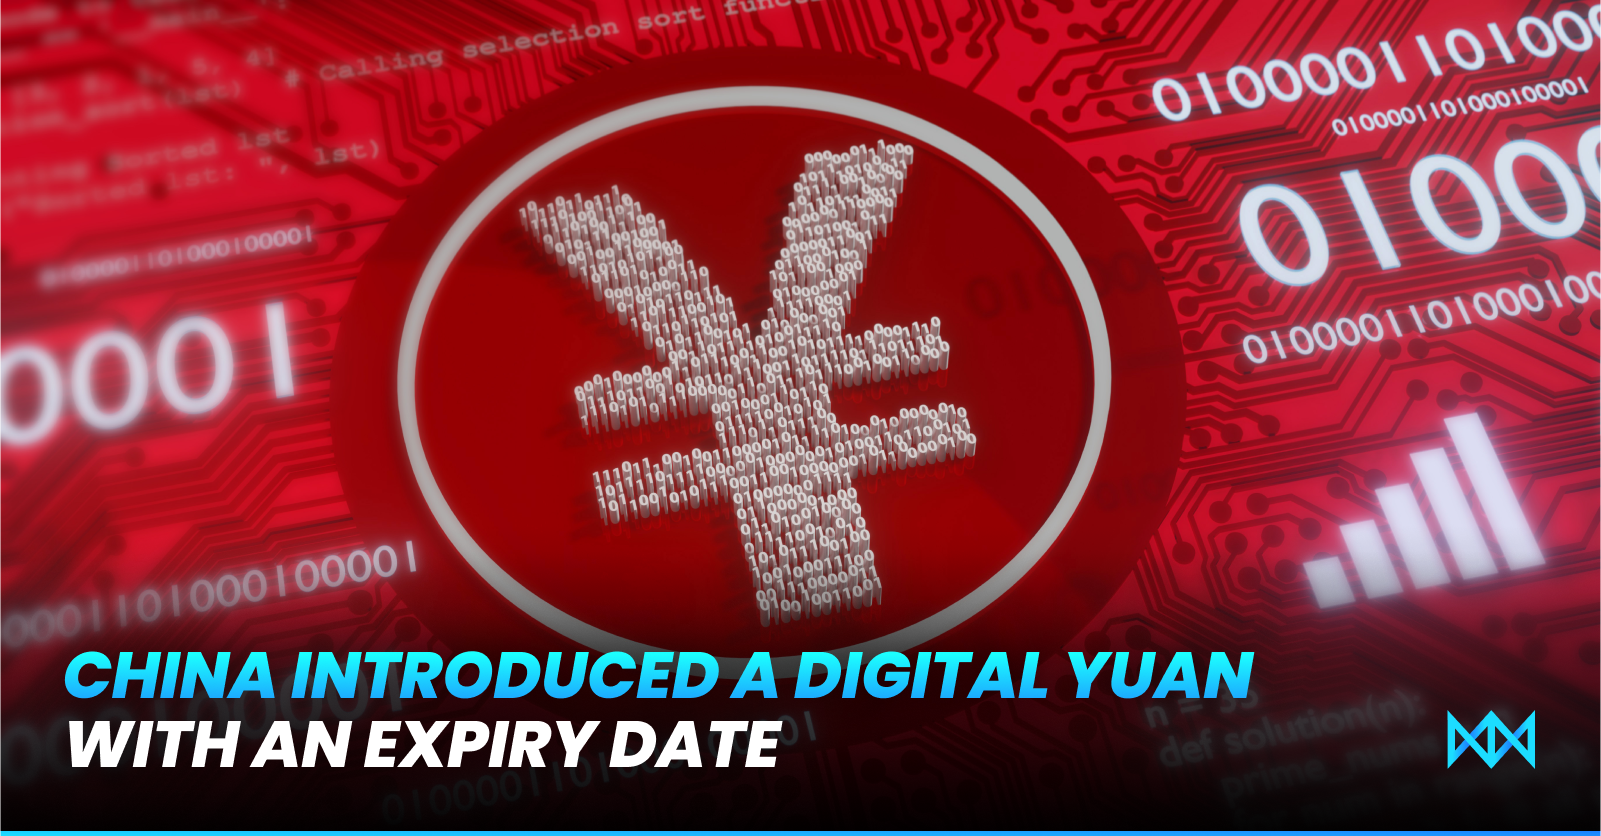 Digital Yuan DCEP: A currency that expires